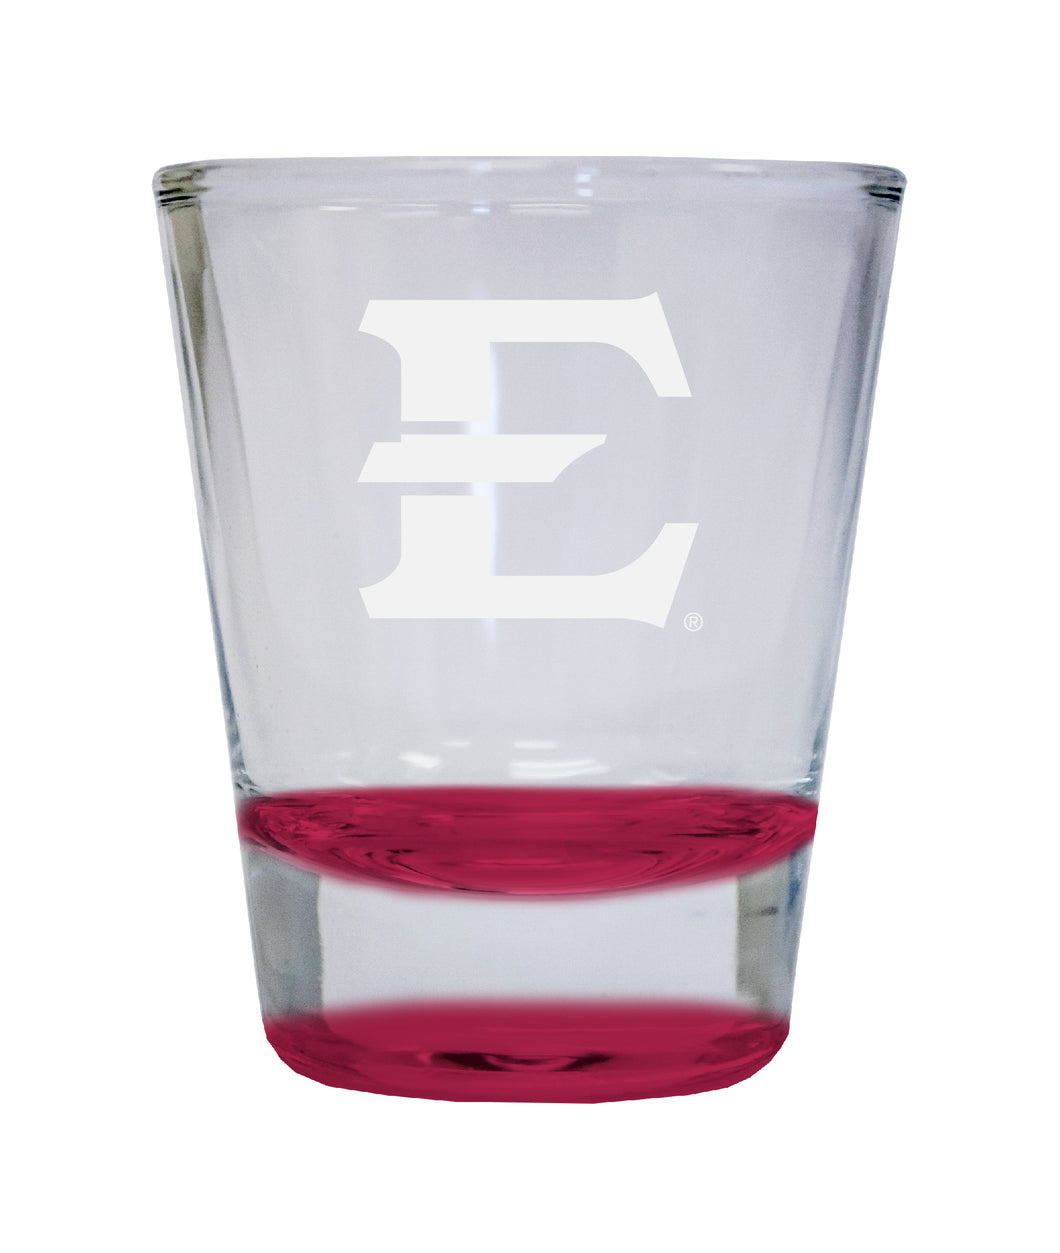 East Tennessee State University Etched Round Shot Glass 2 oz Red